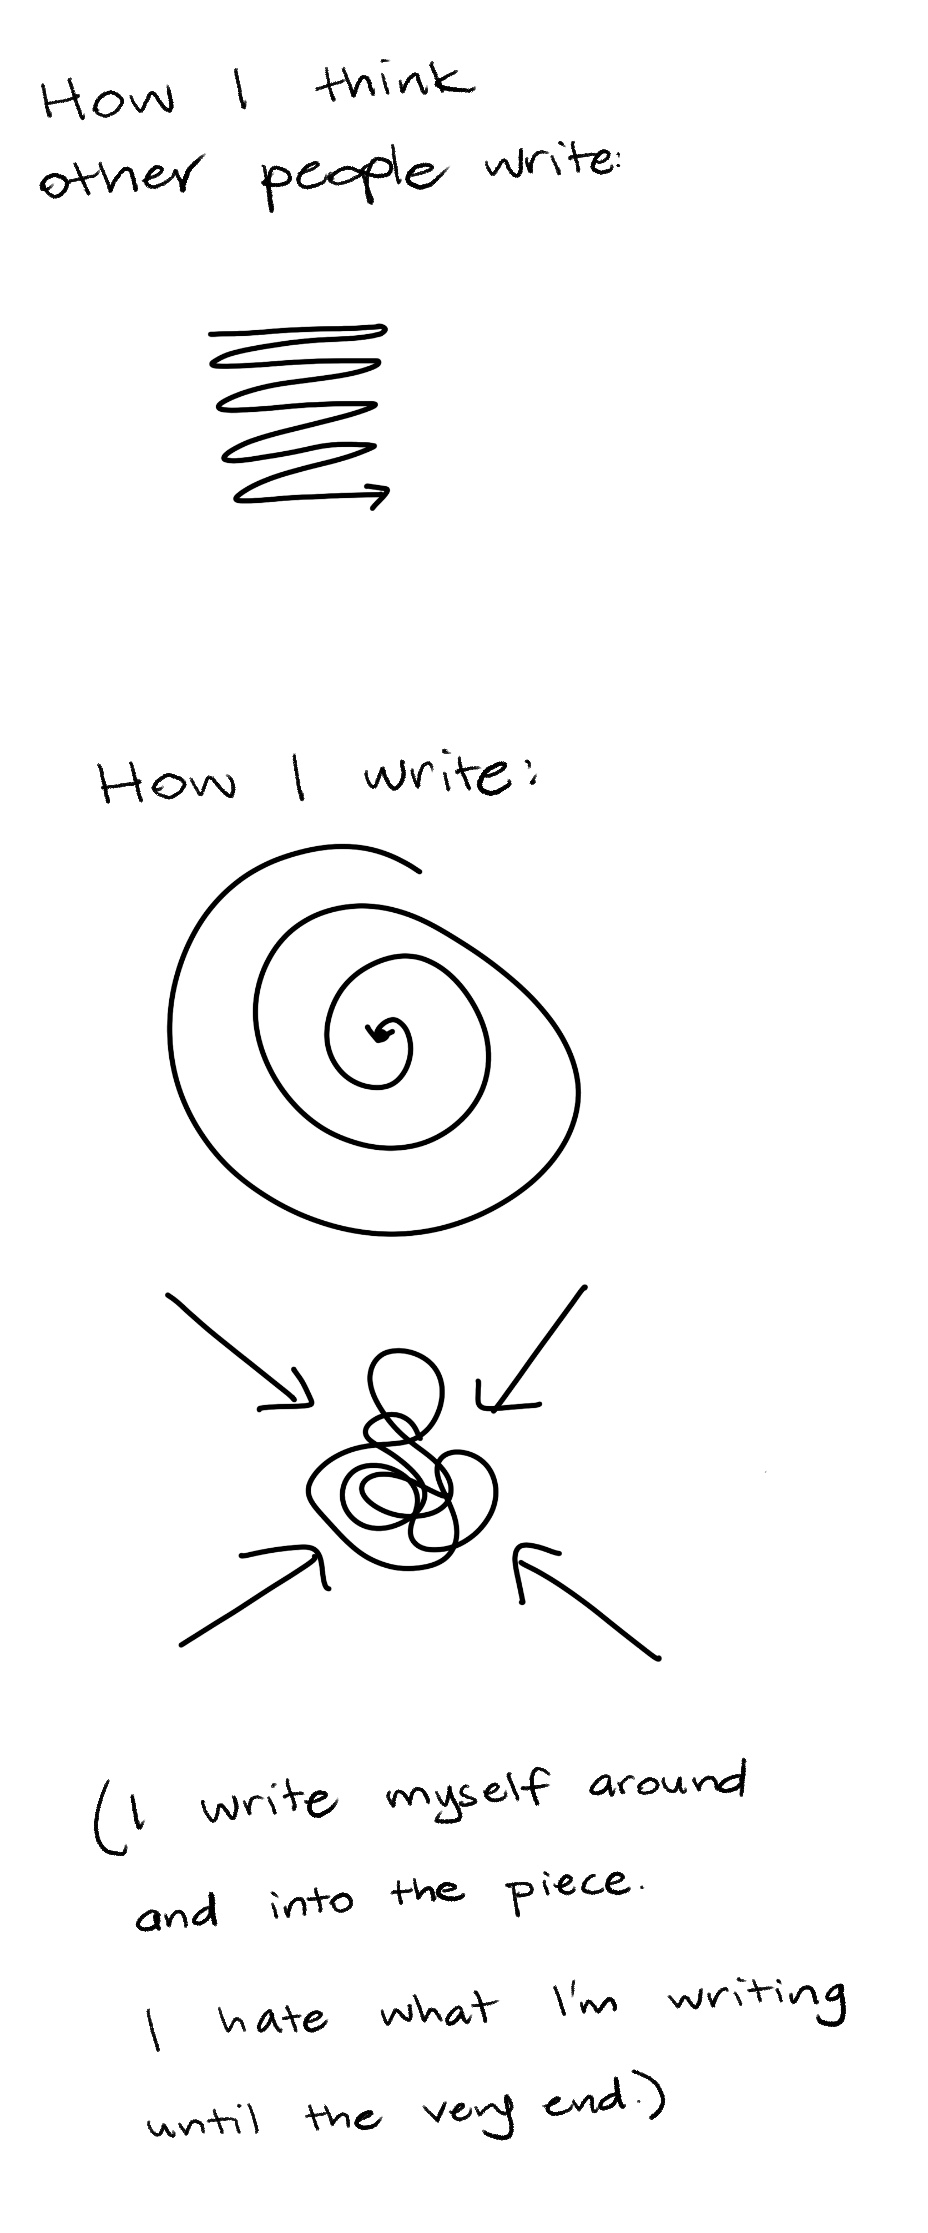 A doodle that compares how I think other people write (in a linear fashion from top to bottom), and how I write (a big spiral and lots of arrows and squiggles). The note in the image says “I write myself around and into the piece. I hate what I’m writing until the very end.”